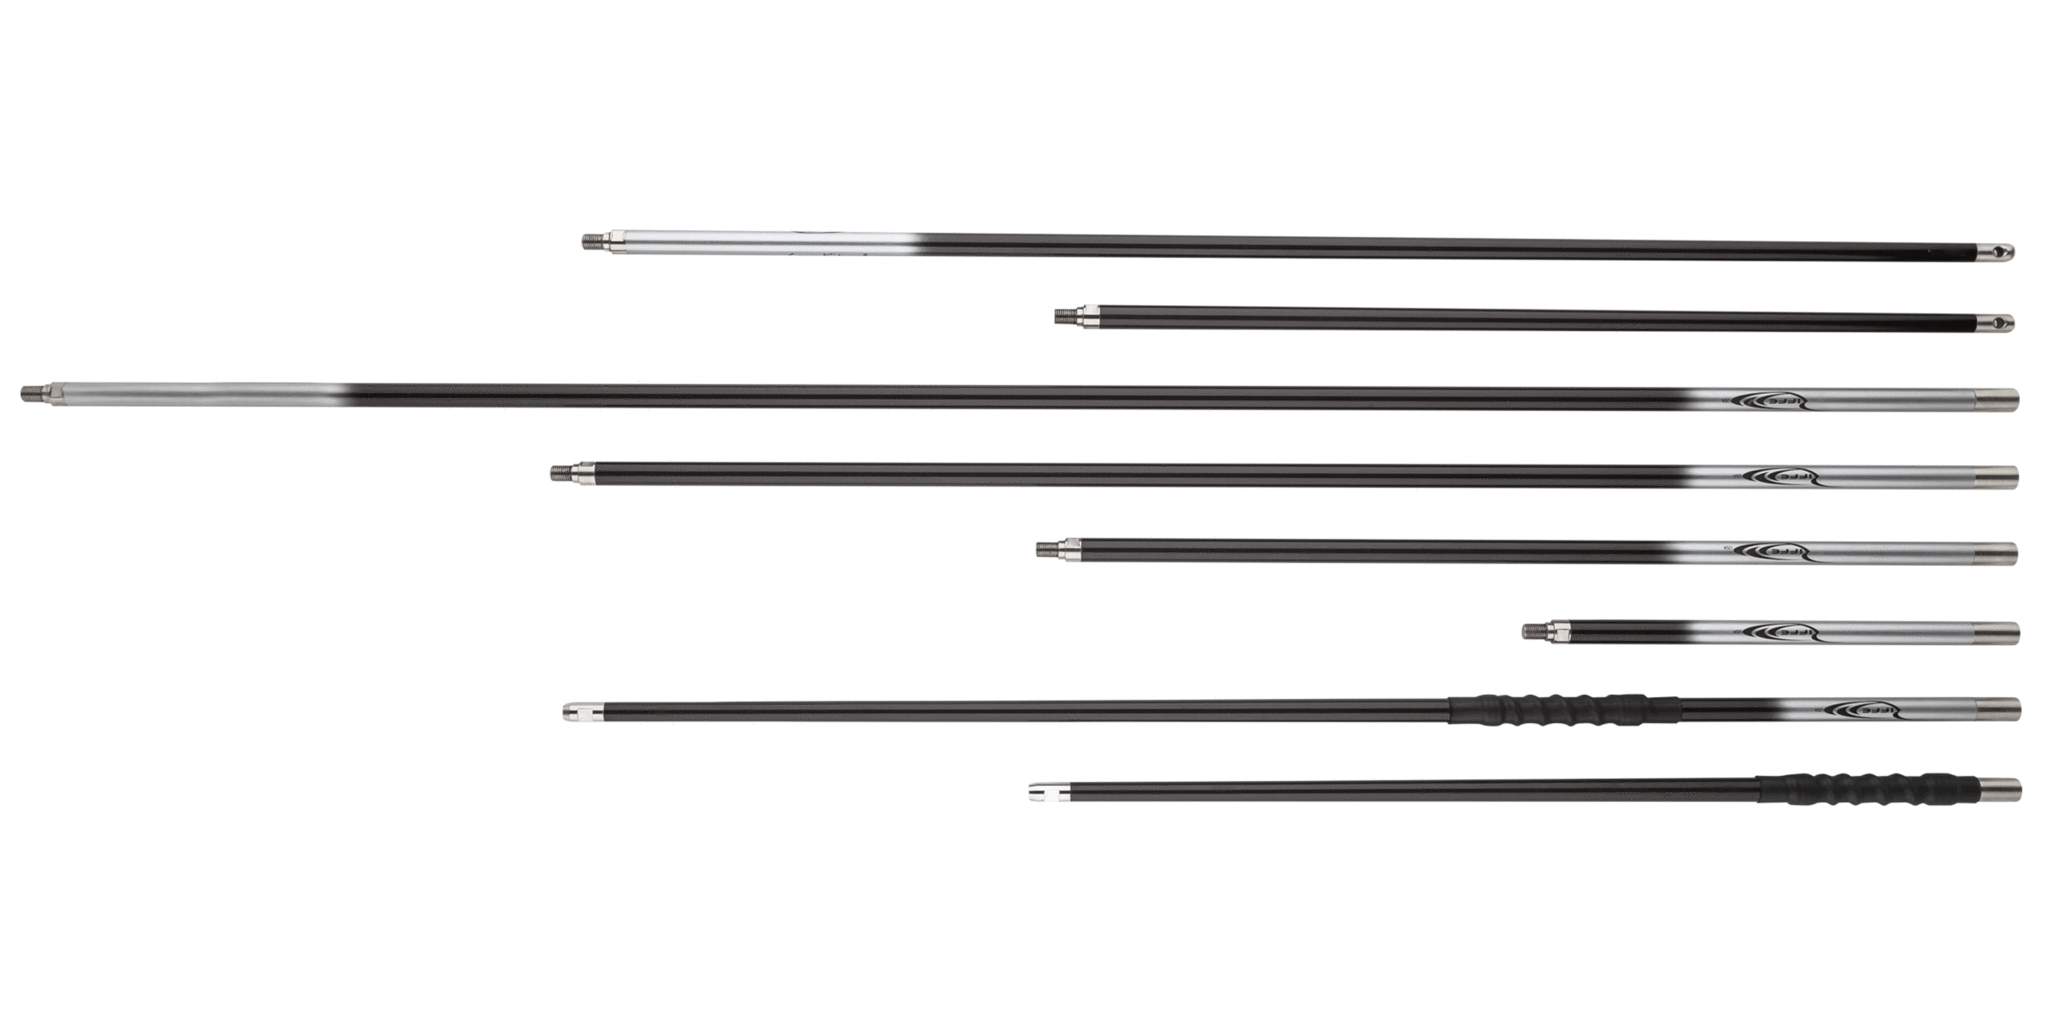 Riffe Carbon Fiber Pole Spear Sections 12 (30.5cm) Mid Section